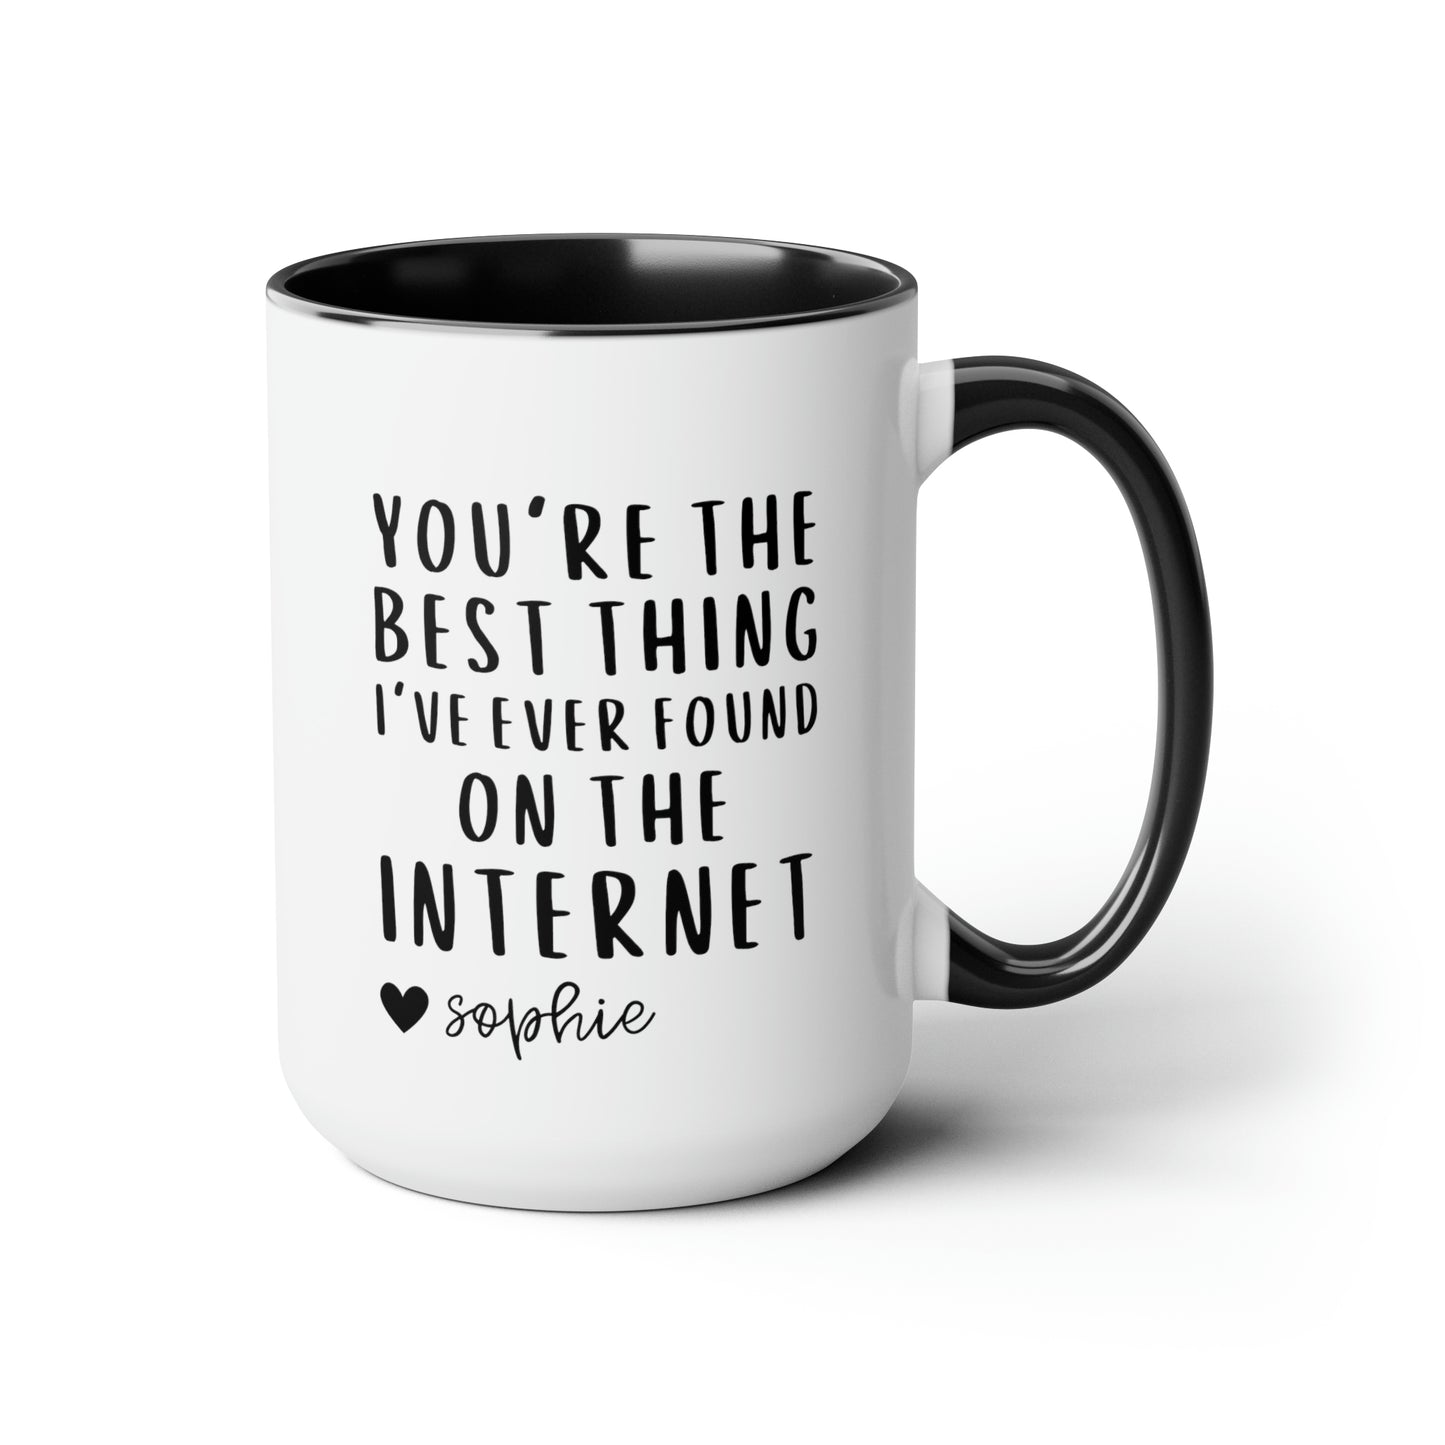 you are the best thing ive ever found on the internet personalized custom 15oz white with black accent black interior mug funny coffee mug tea cup gift valentines anniversary boyfriend girlfriend online dating match waveywares wavey wares large big mug